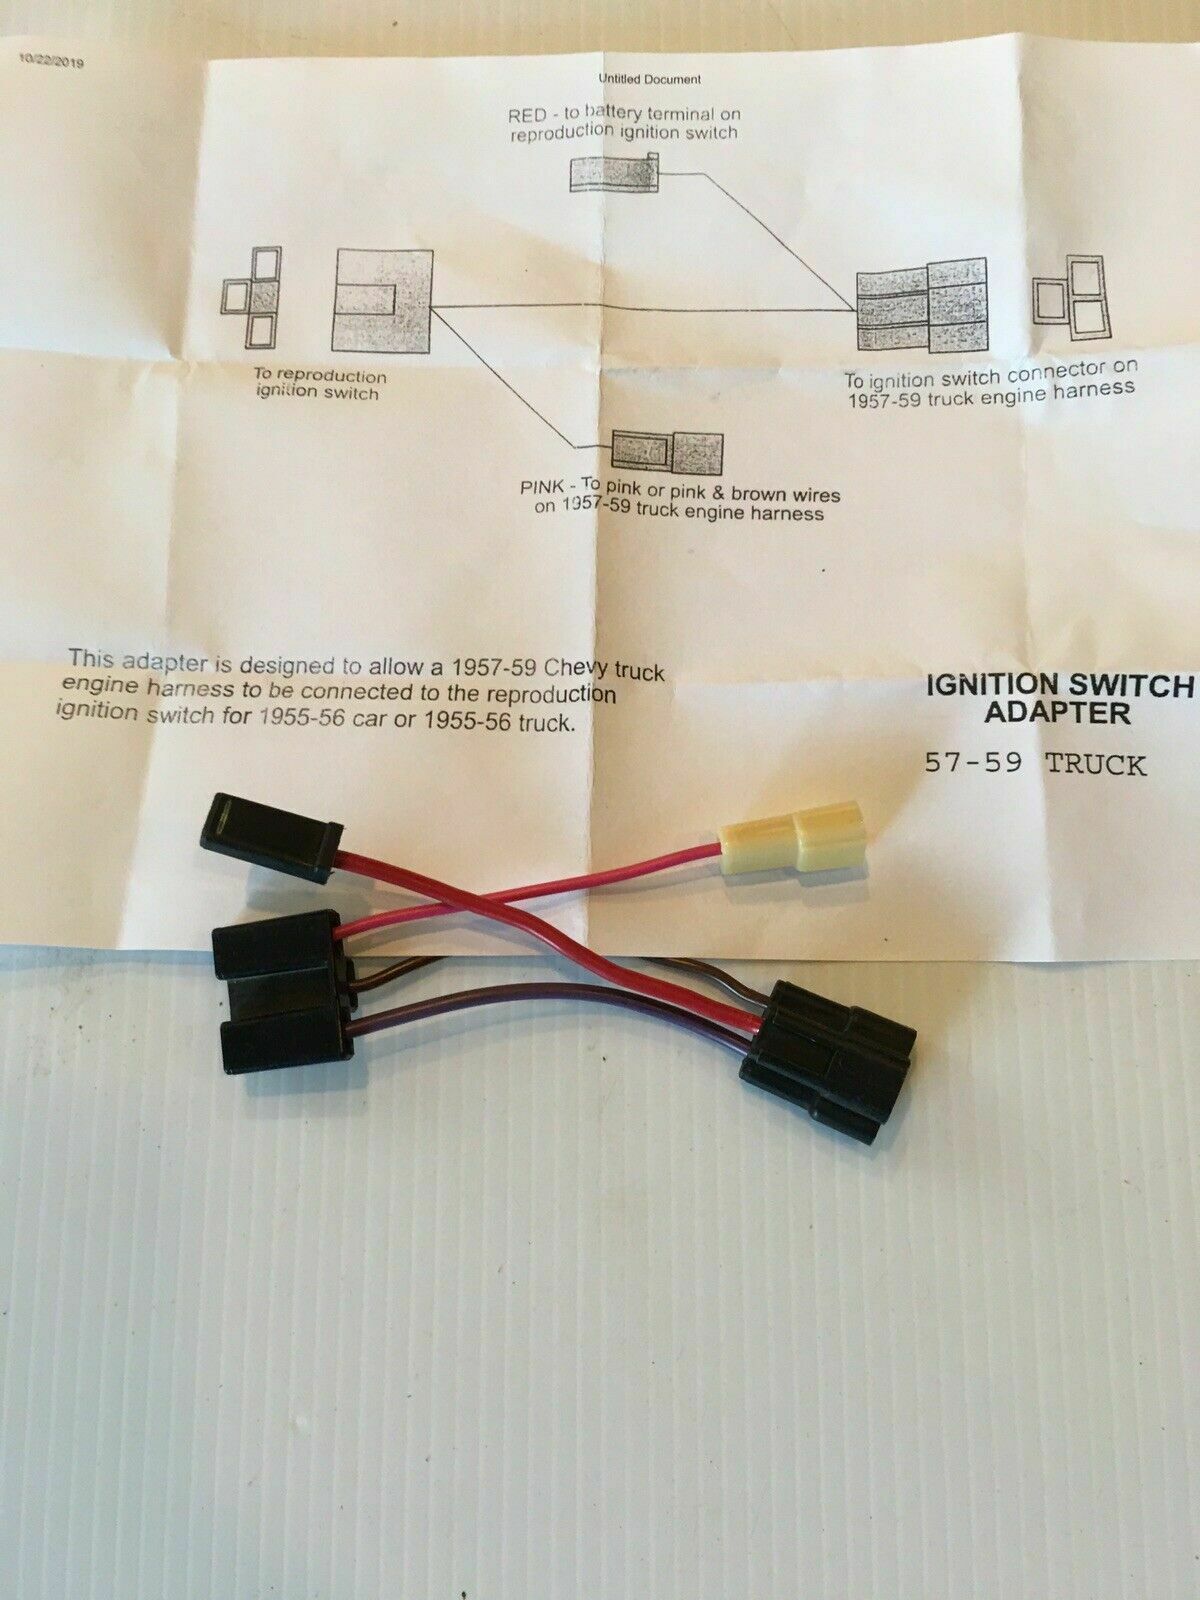 Wiring Harnesses: 1957 1958 1959 CHEVY TRUCK IGNITION SWITCH ADAPTER HARNESS Use With 55 56 IGN Sw